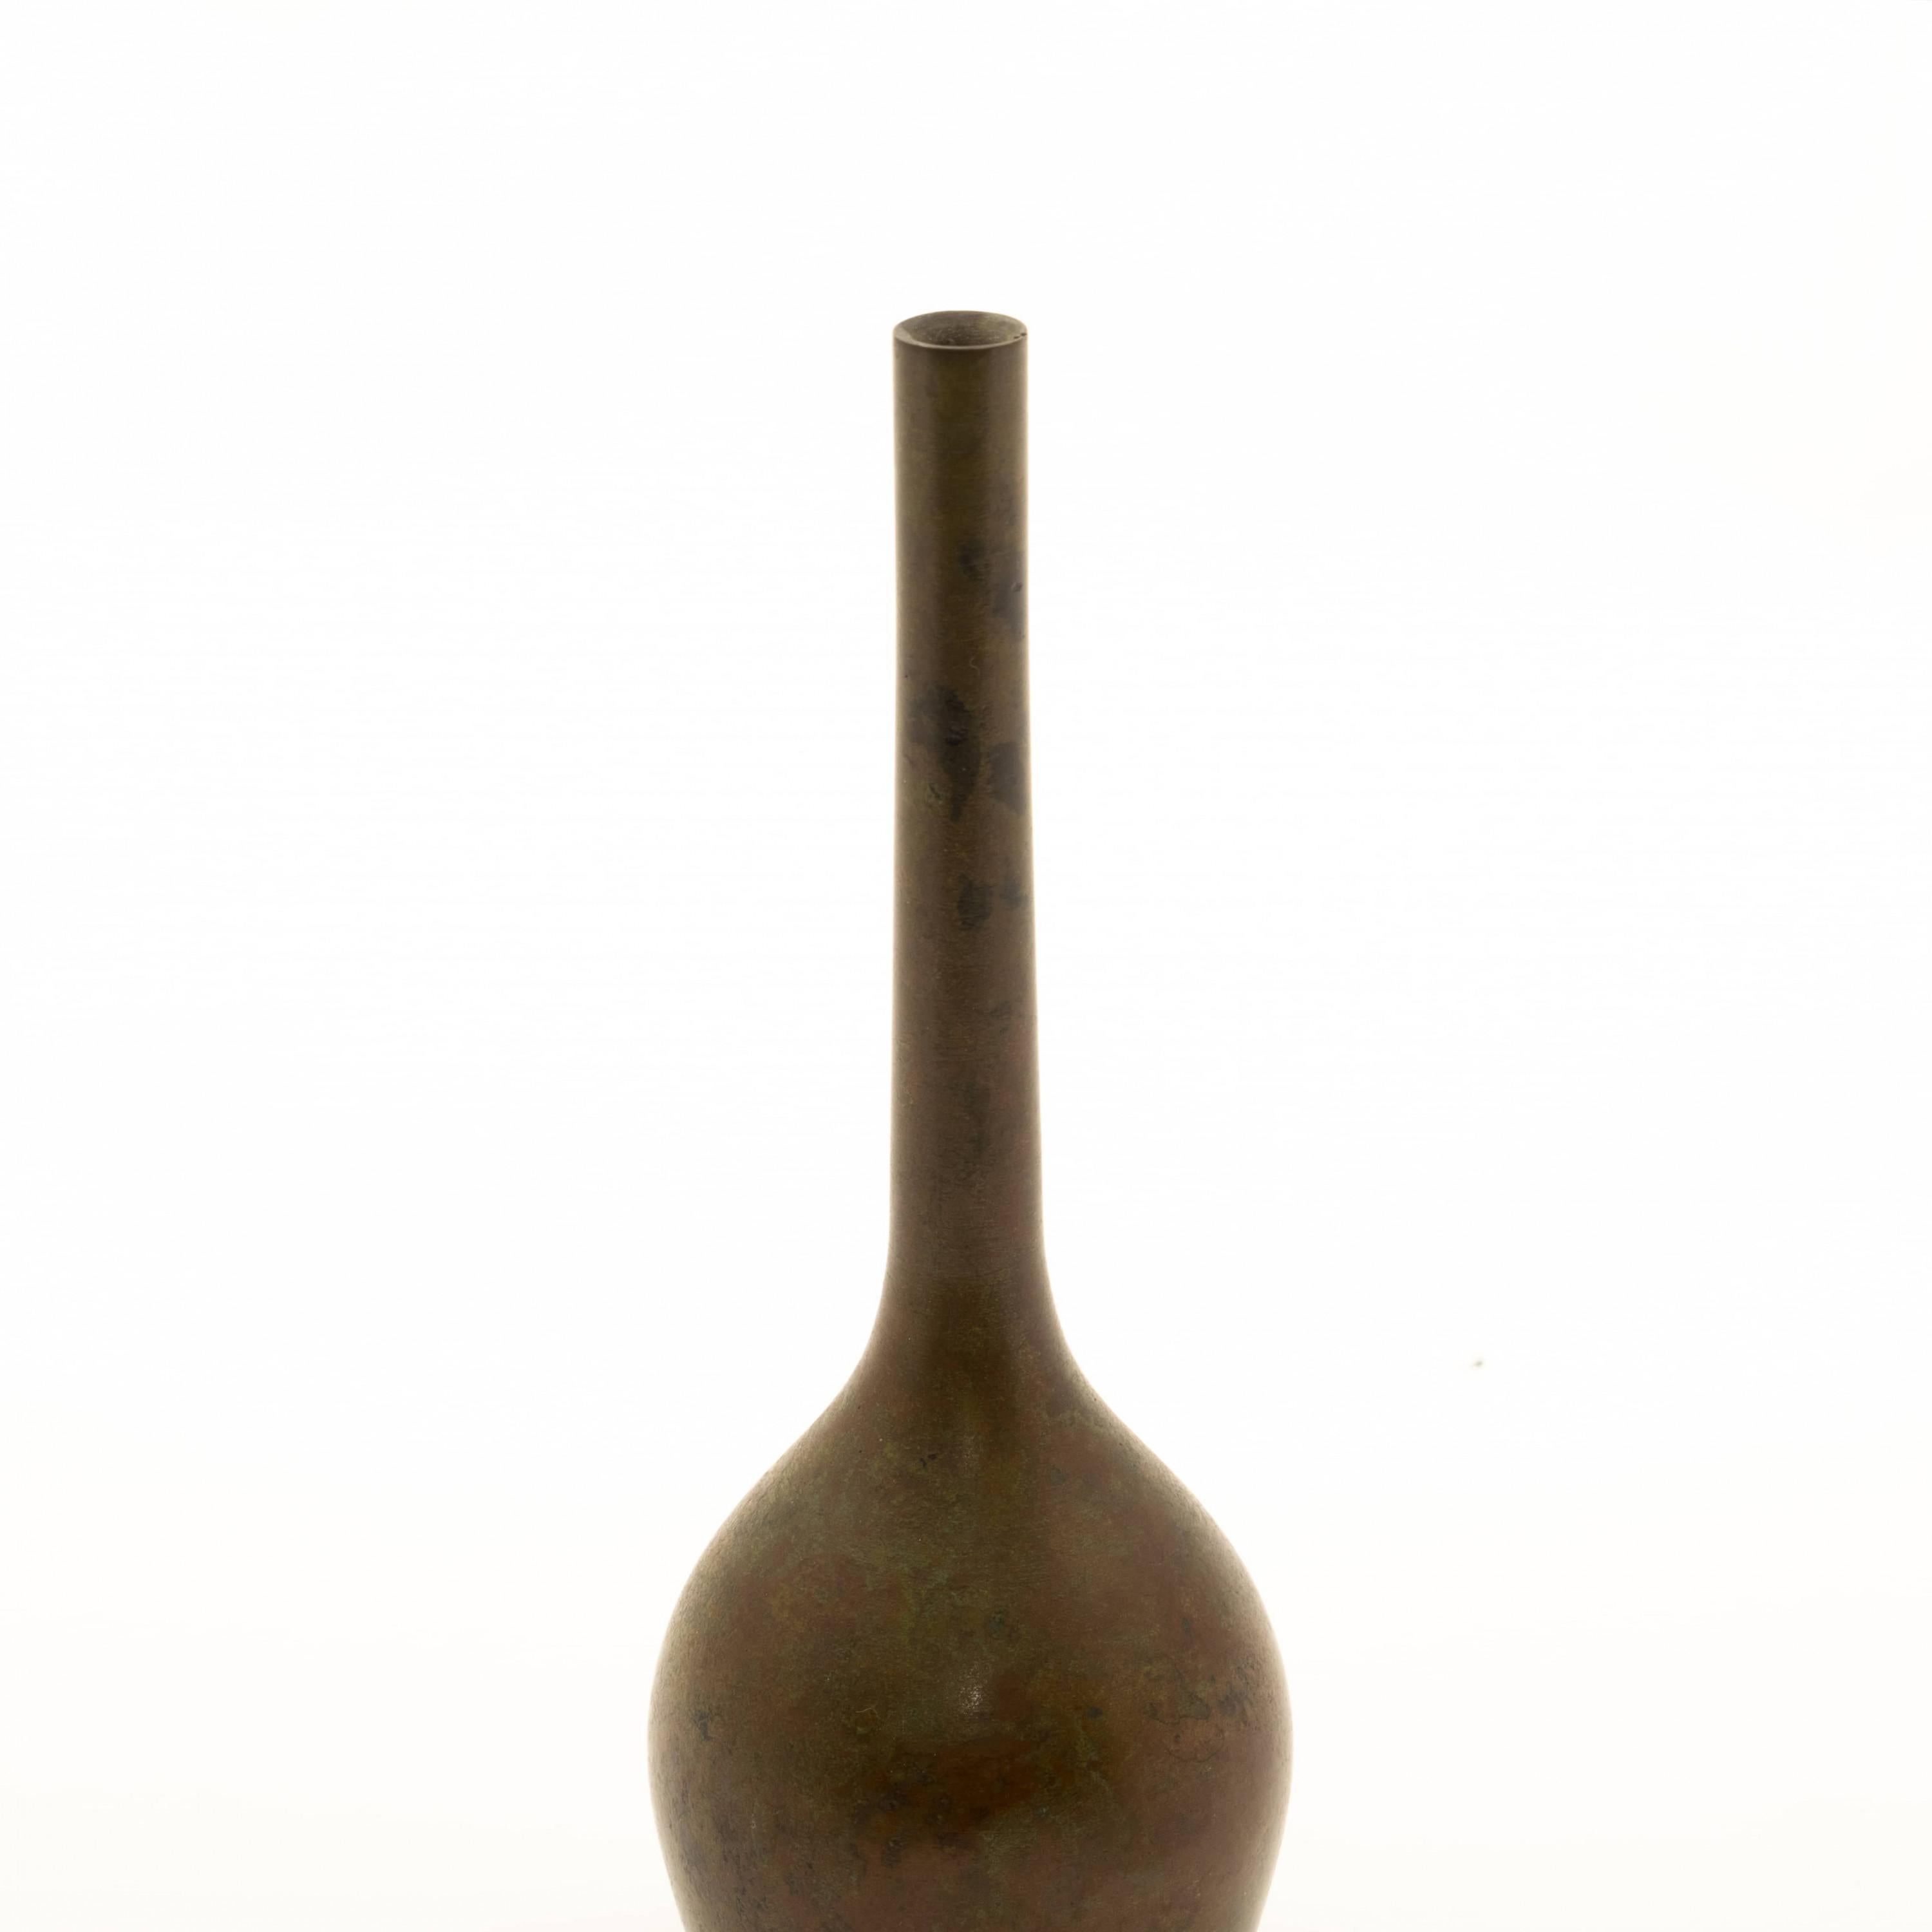 Elegant Ikebana bronze vase.
Bronze patinated using a Murashido oil technique.
Green and rust colored patina.
Marked to the underside: Hasegawa Gasen.

Hasegawa Gasen (1901-1994) was a renowned Japanese metalworker / bronze artist who, among